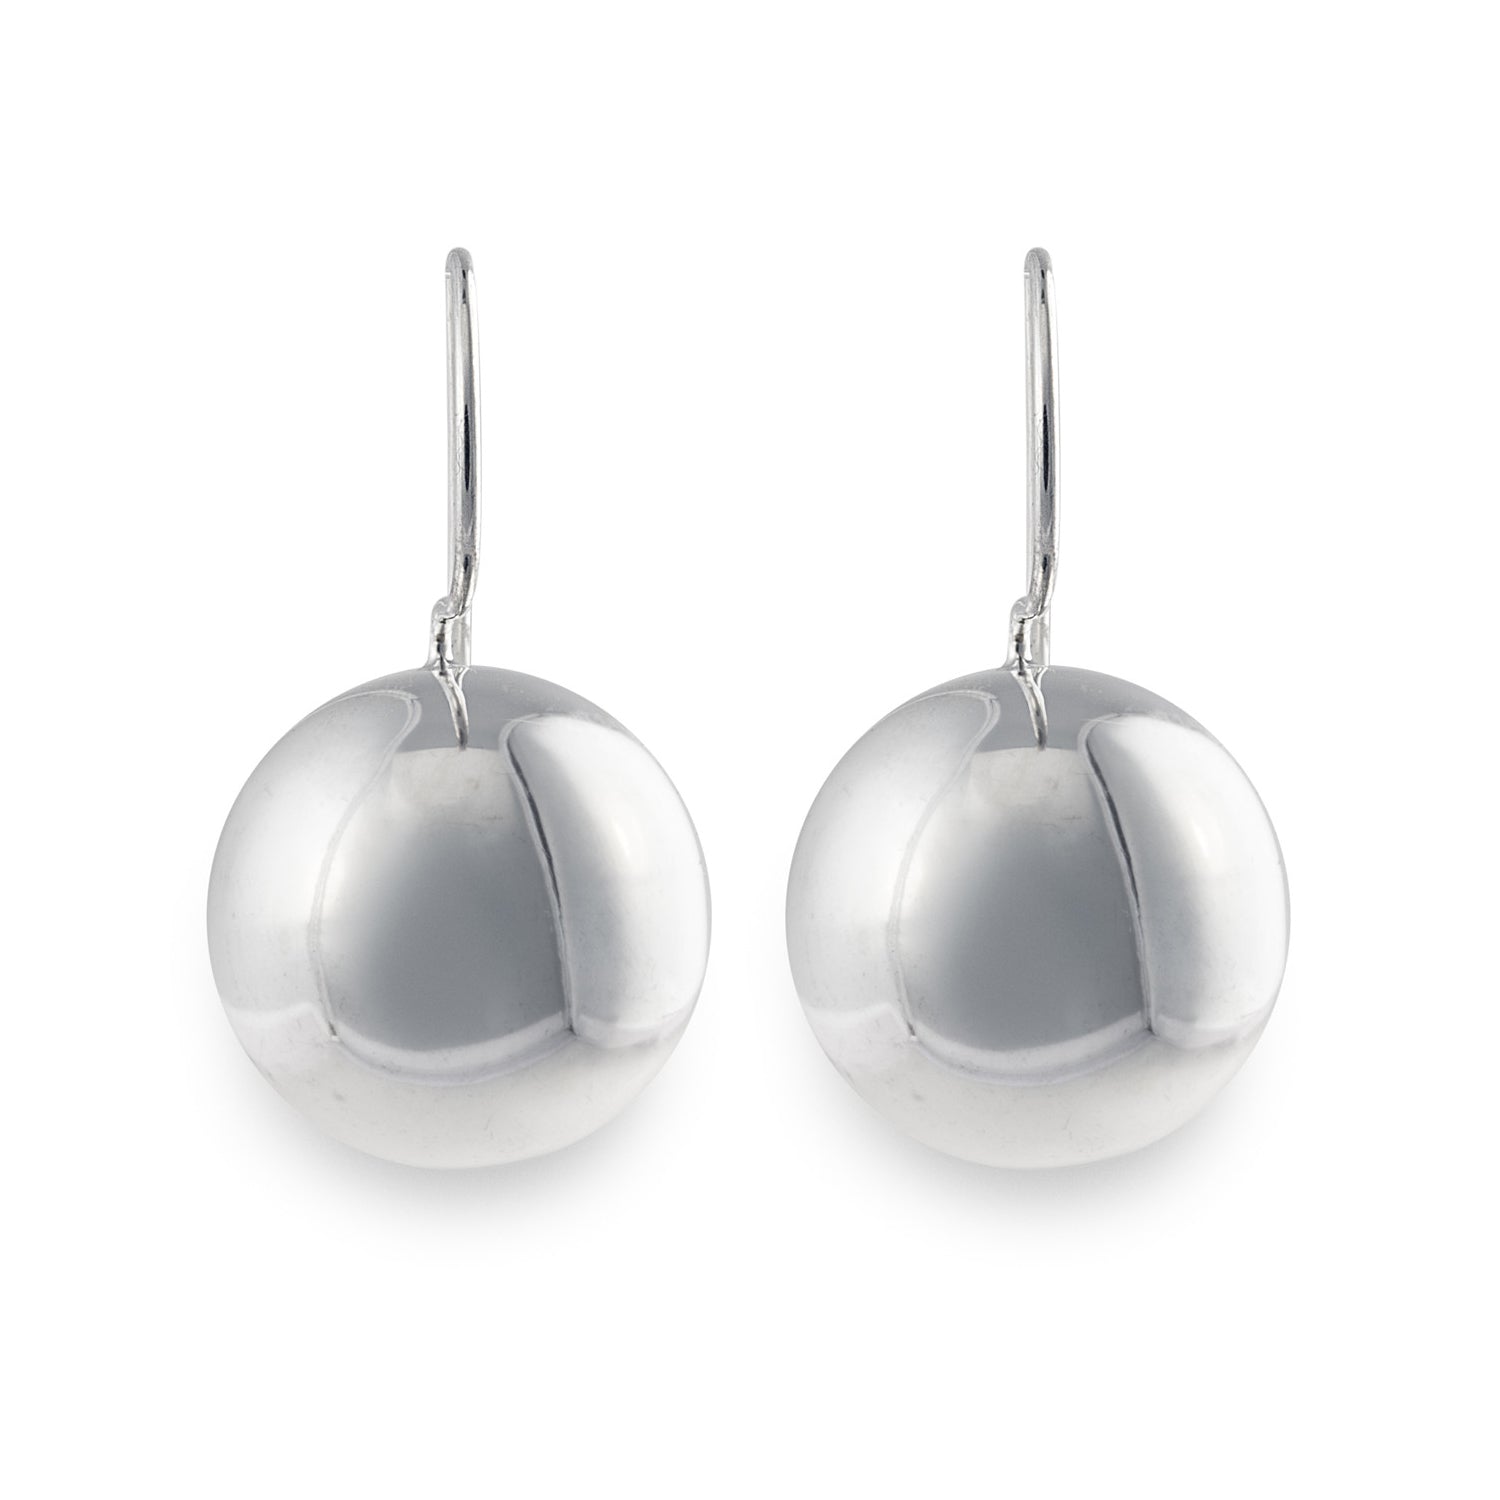 The Large Villa Drop Earrings feature extra large balls in 925 sterling silver. Size:  14mm ball diameter. Worldwide Shipping. Jewellery by Bellagio & Co.